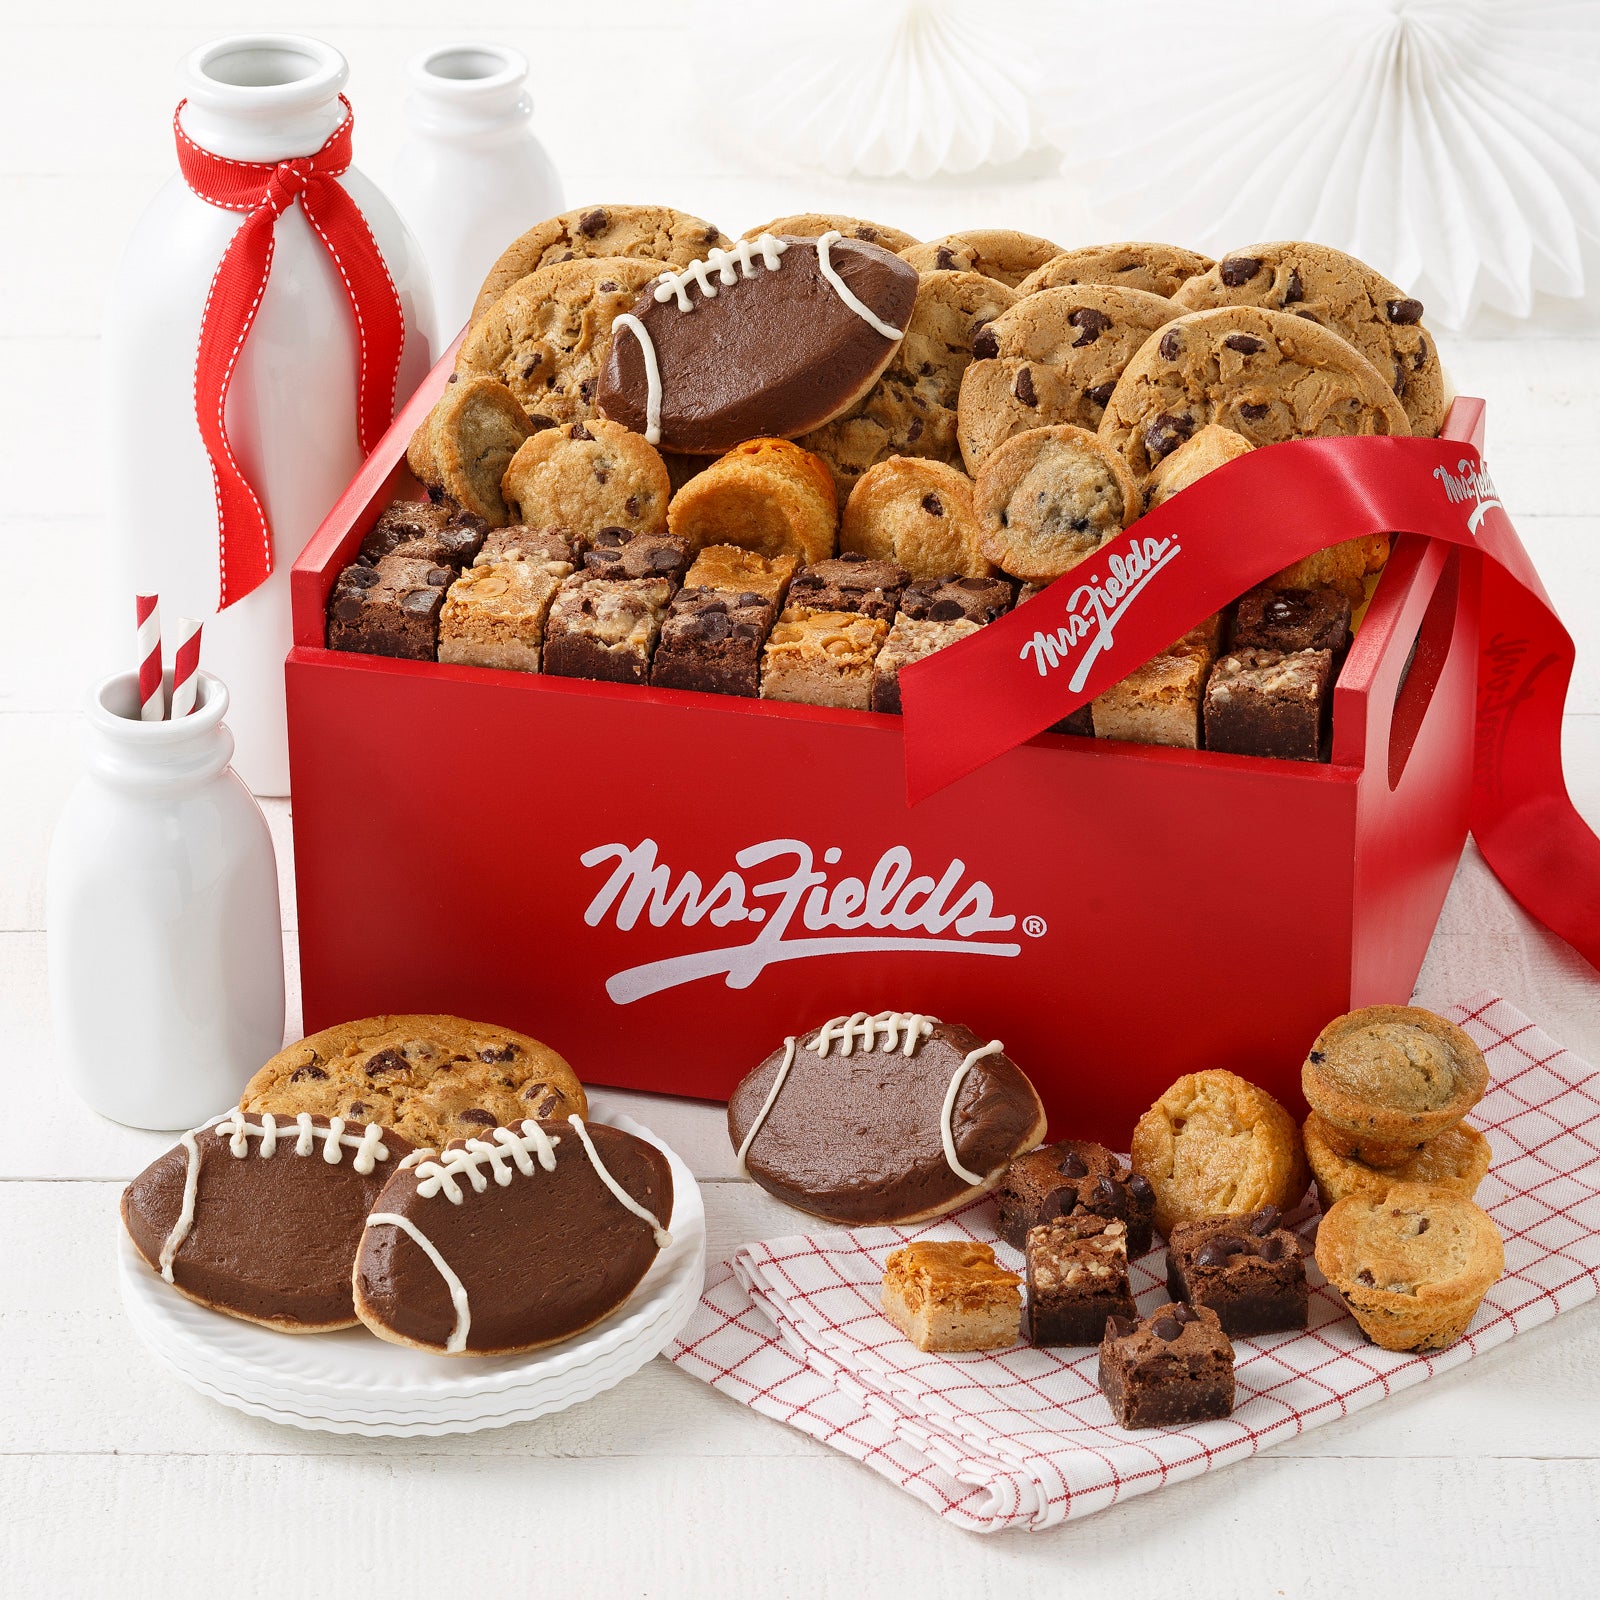 A signature Mrs. Fields red wood crate filled with semi-sweet chocolate chip original cookies, an assortment of brown bites, muffins, and four frosted football cookies